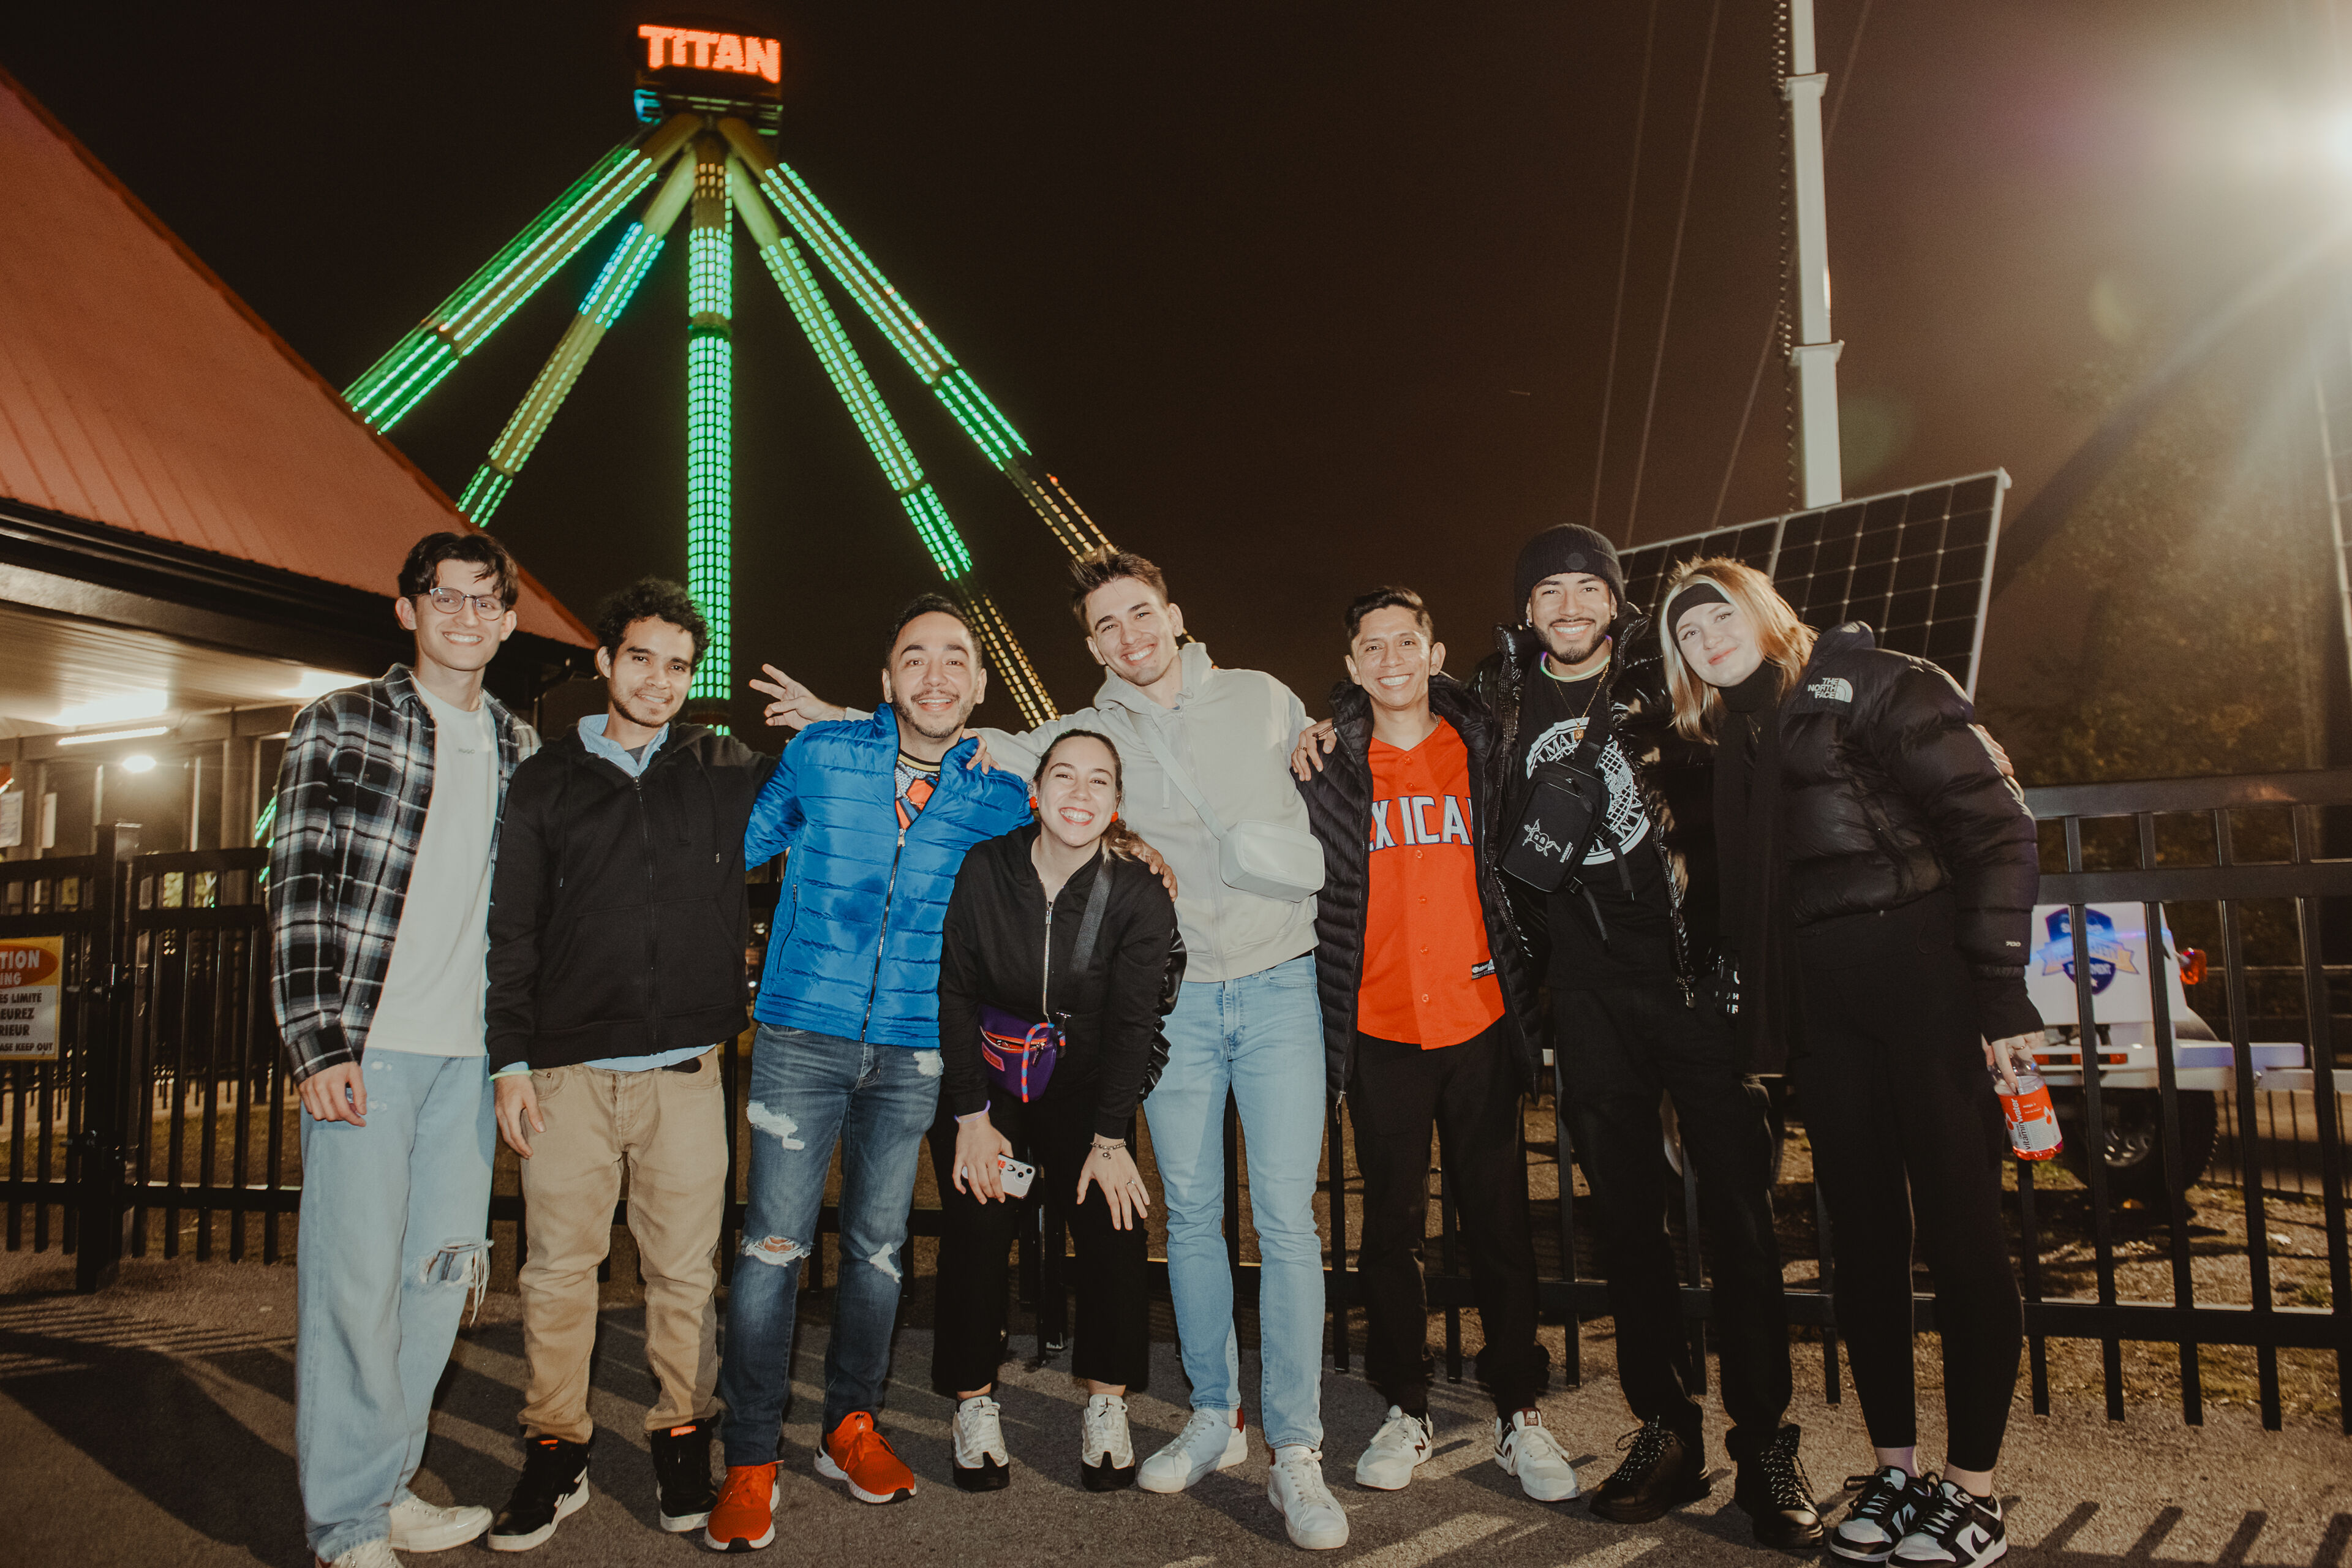 Friends gather for a fun night out, smiling beneath the glowing lights of an amusement park ride.